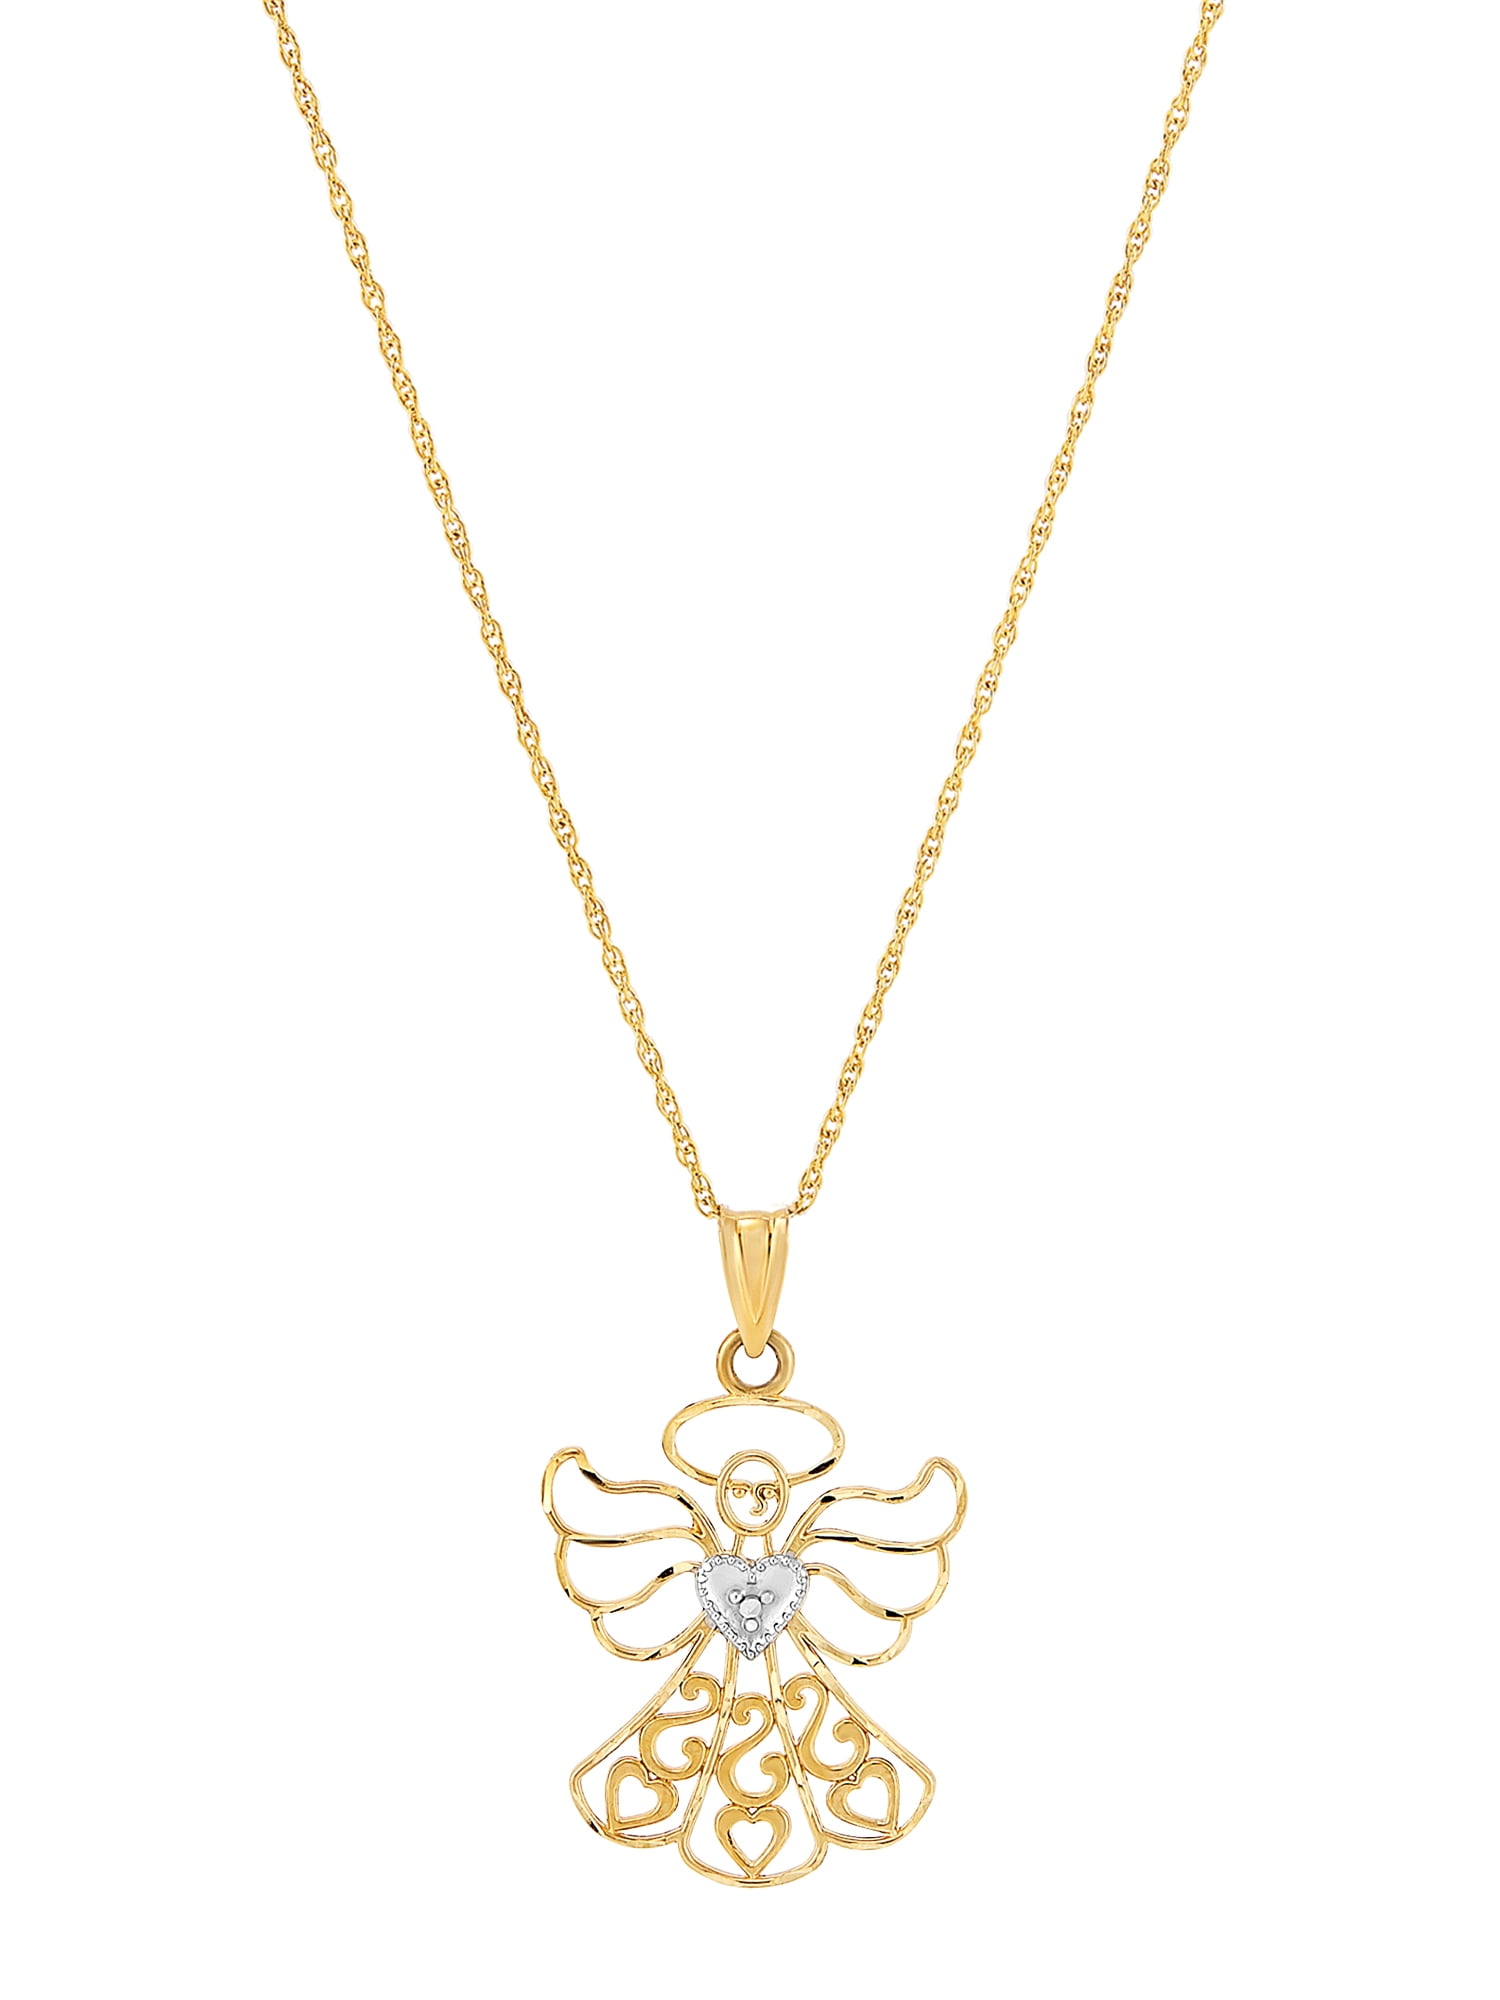 Solid 14k Yellow & White Two Tone Gold Filigree Angel Pendant 24mm x 15mm 